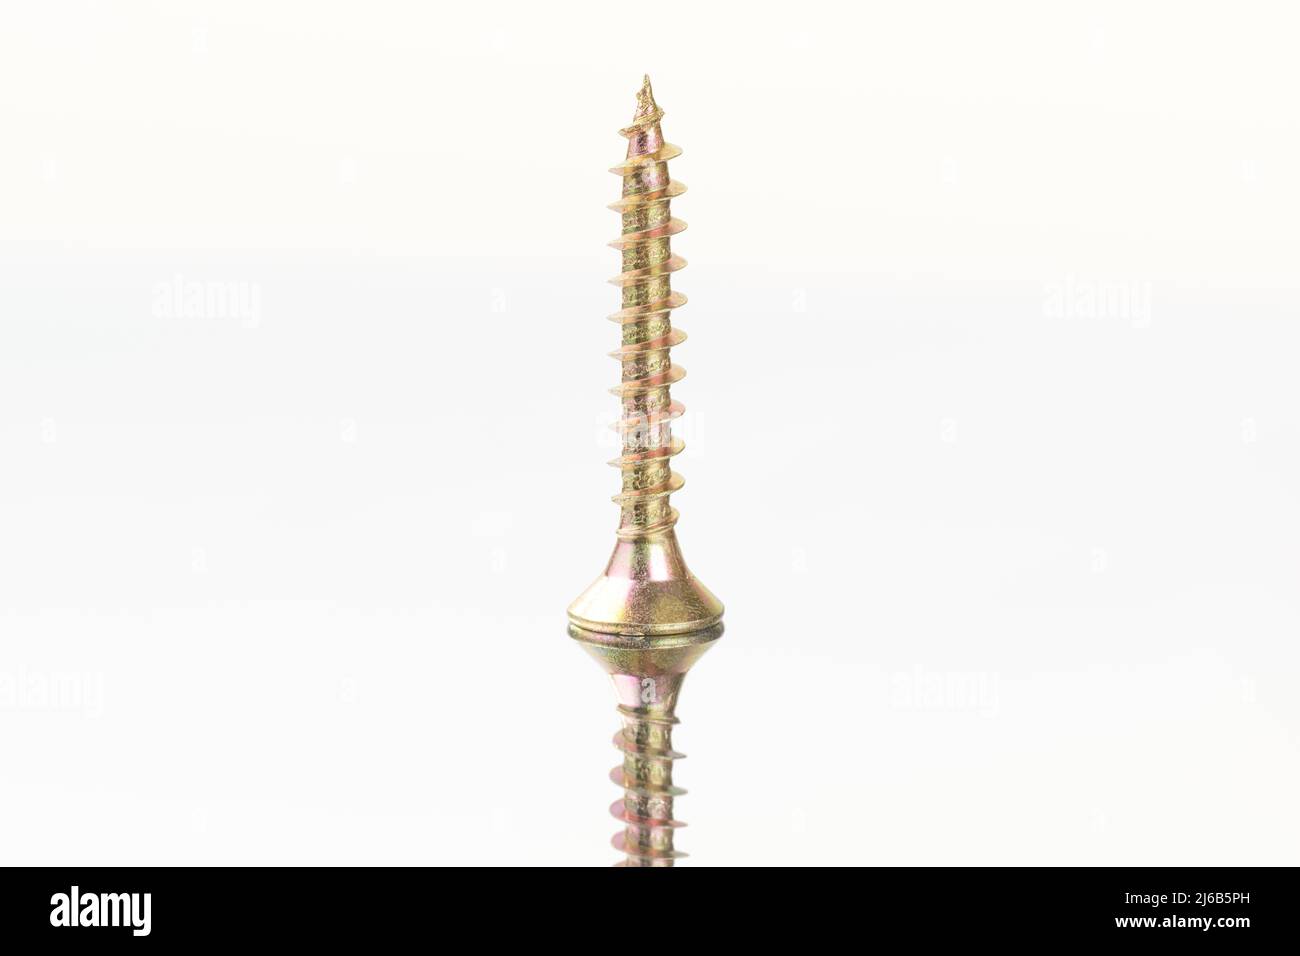 Gold colored screw close up standing on a mirror surface with reflection. Isolated on white, clipping path included Stock Photo